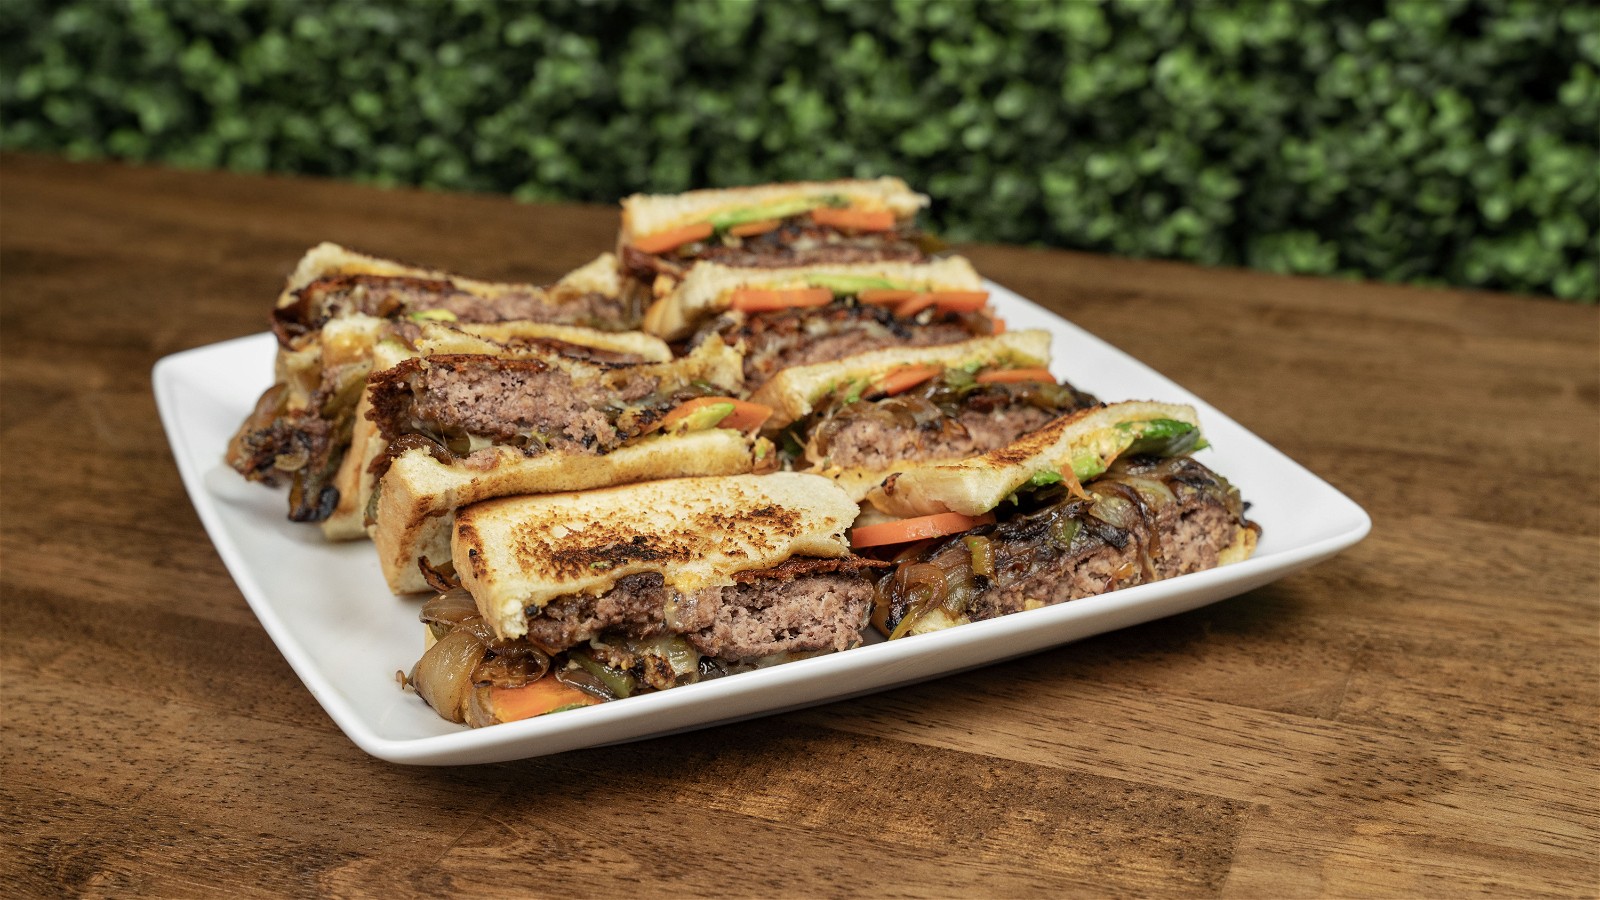 Image of Feed 4 for $20 Southwest Patty Melts